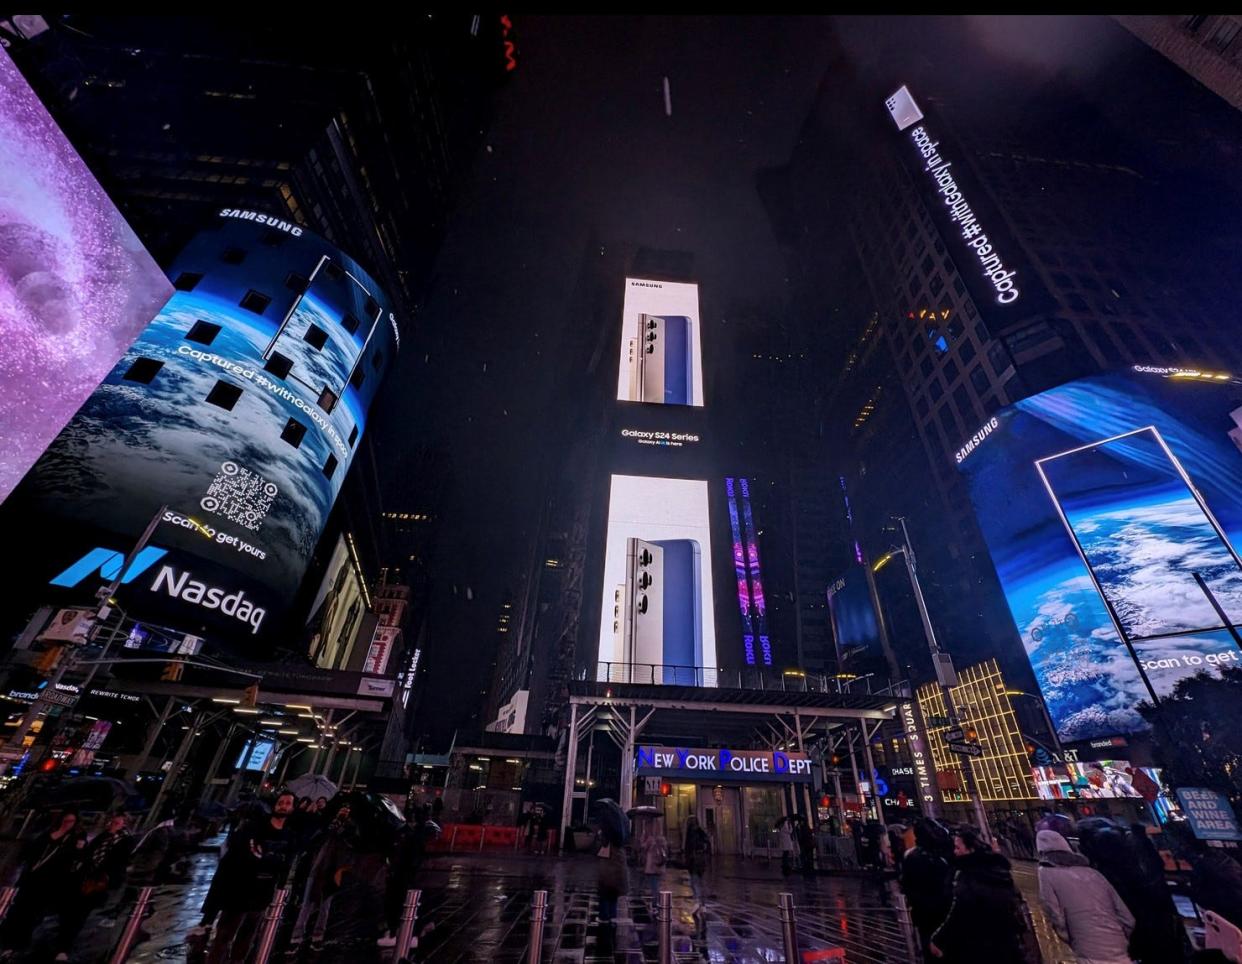 Sent Into Space recently wrapped up a project with Samsung for the release of the new Galaxy S24. The results of the partnership, which involved taking photos from space using the mobile handsets from around the country, could recently be seen in Times Square in New York City.